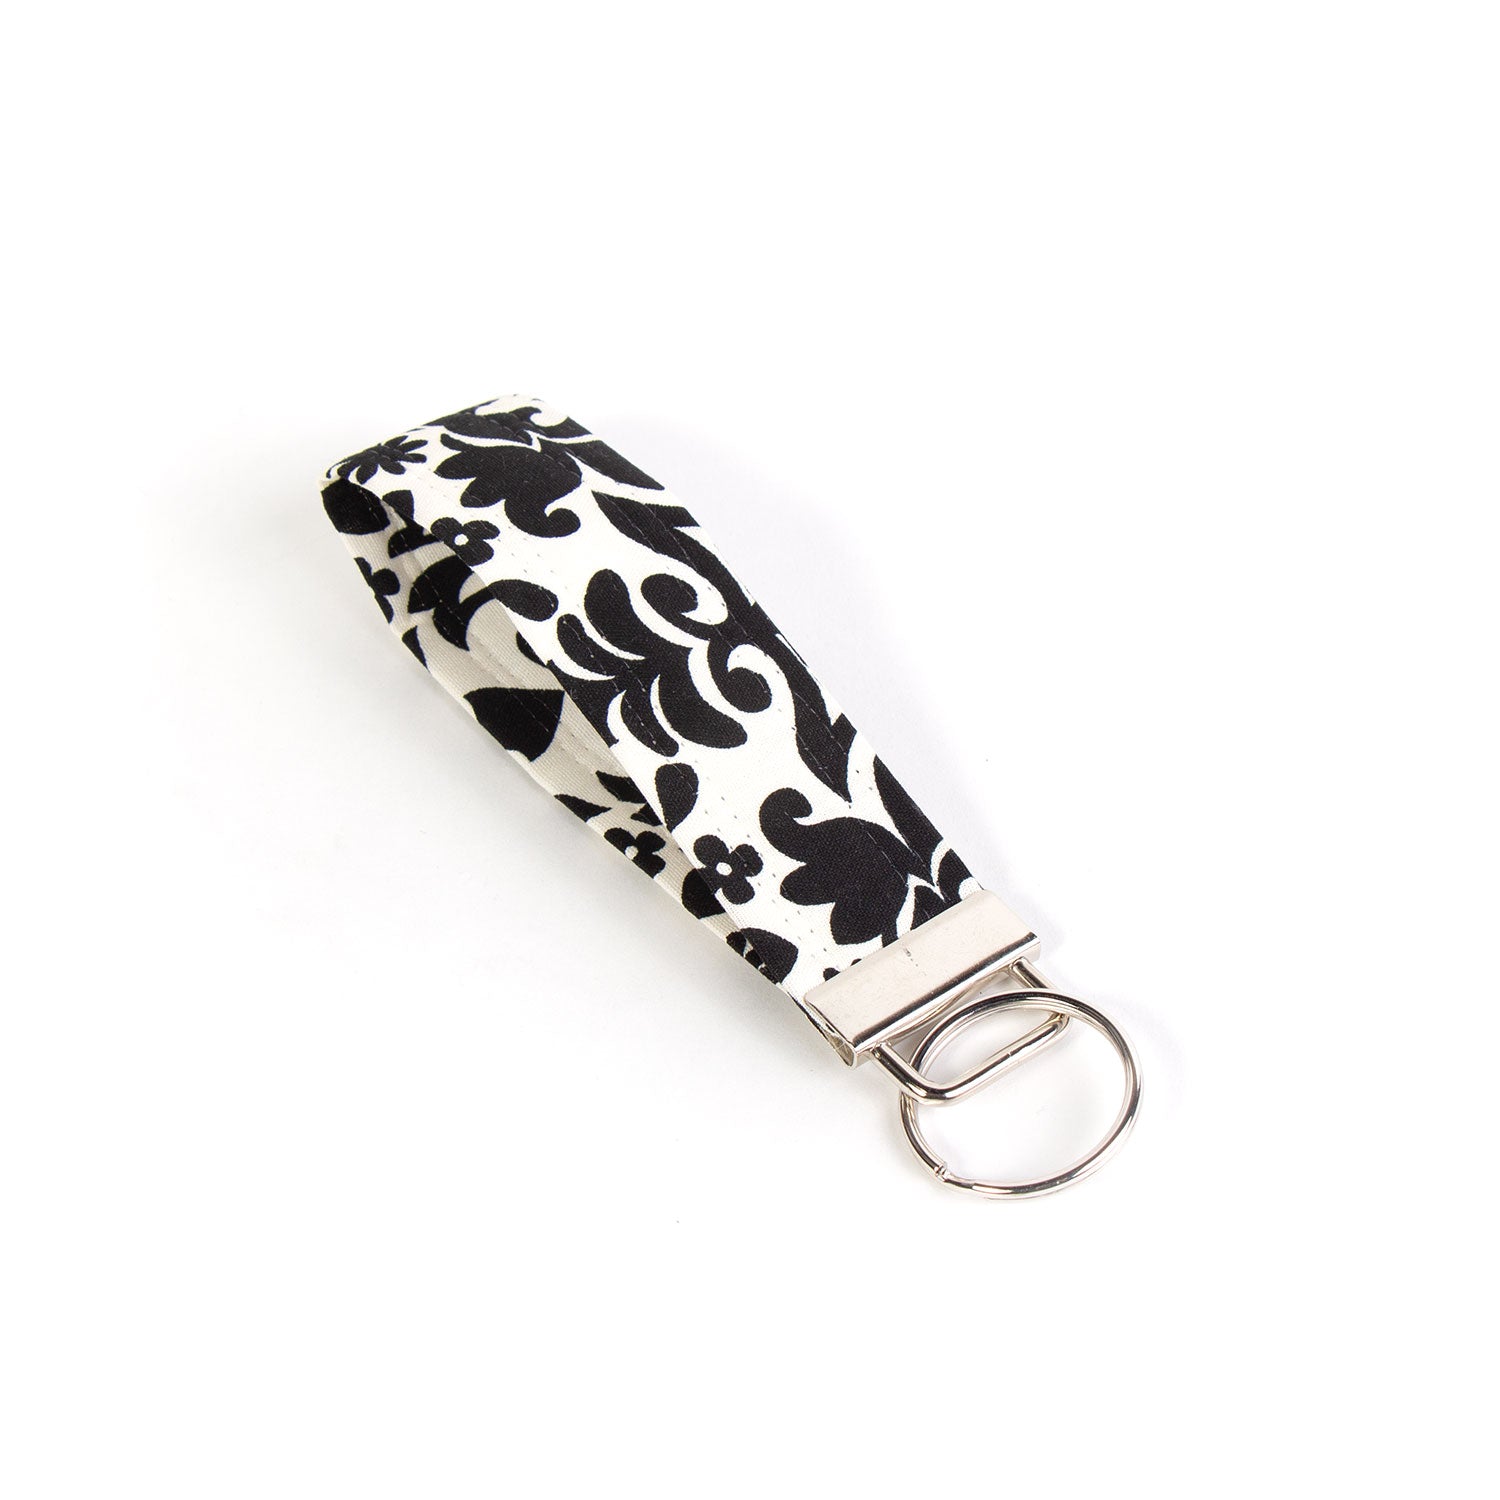 Fabric pattern Wristlet Key Fob Key Chain with Split Ring and Clasp key  holder